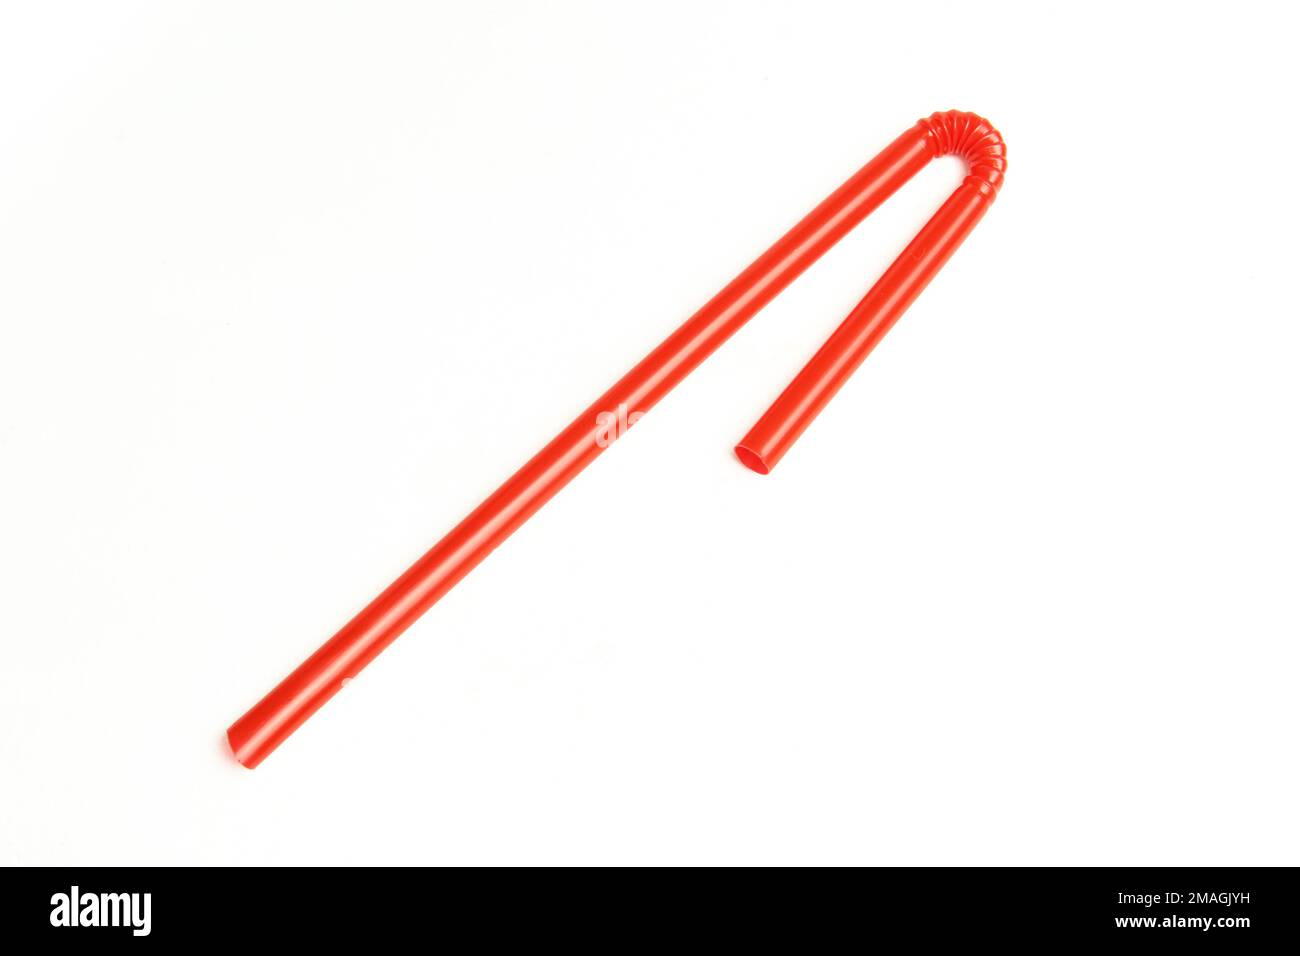 Red plastic straw isolated on white background Stock Photo - Alamy